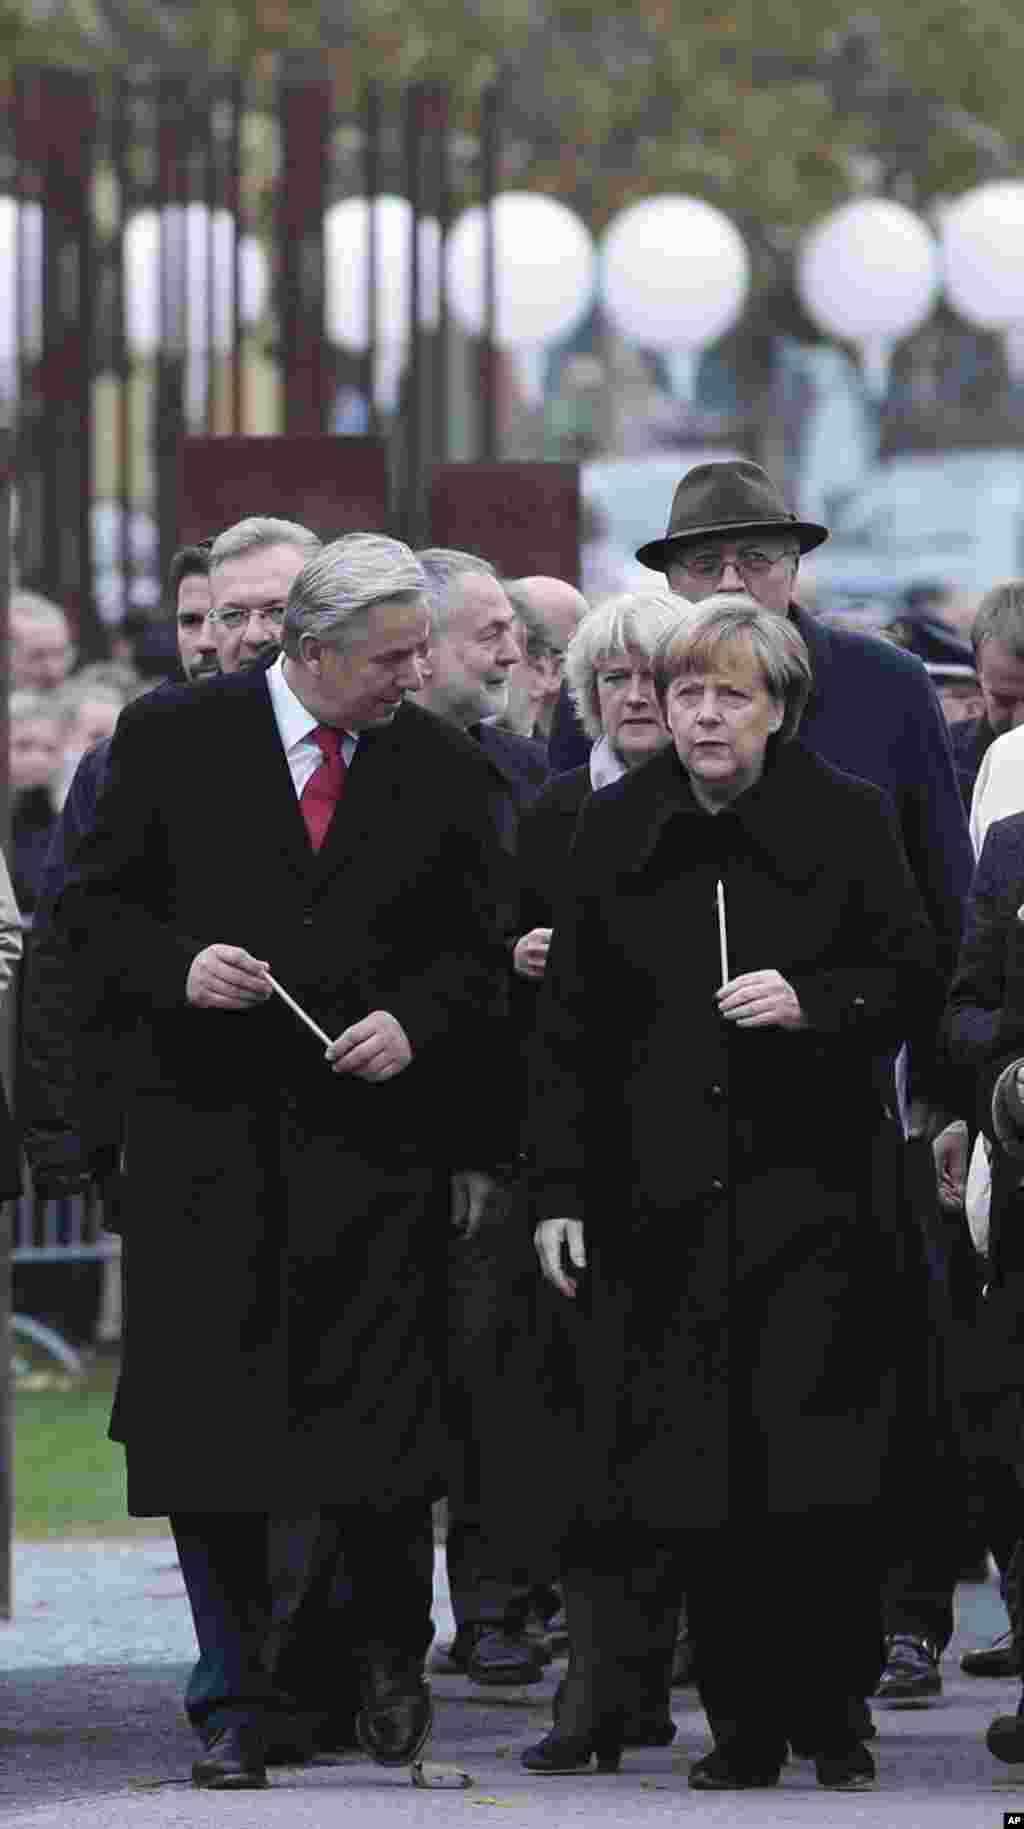 German Chancellor Angela Merkel, right, and Berlin's Mayor Klaus Wowereit, left, arrive for a candle ceremony to commemorate the victims of the wall at the Berlin Wall memorial site at Bernauer Strasse Berlin, Germany. 